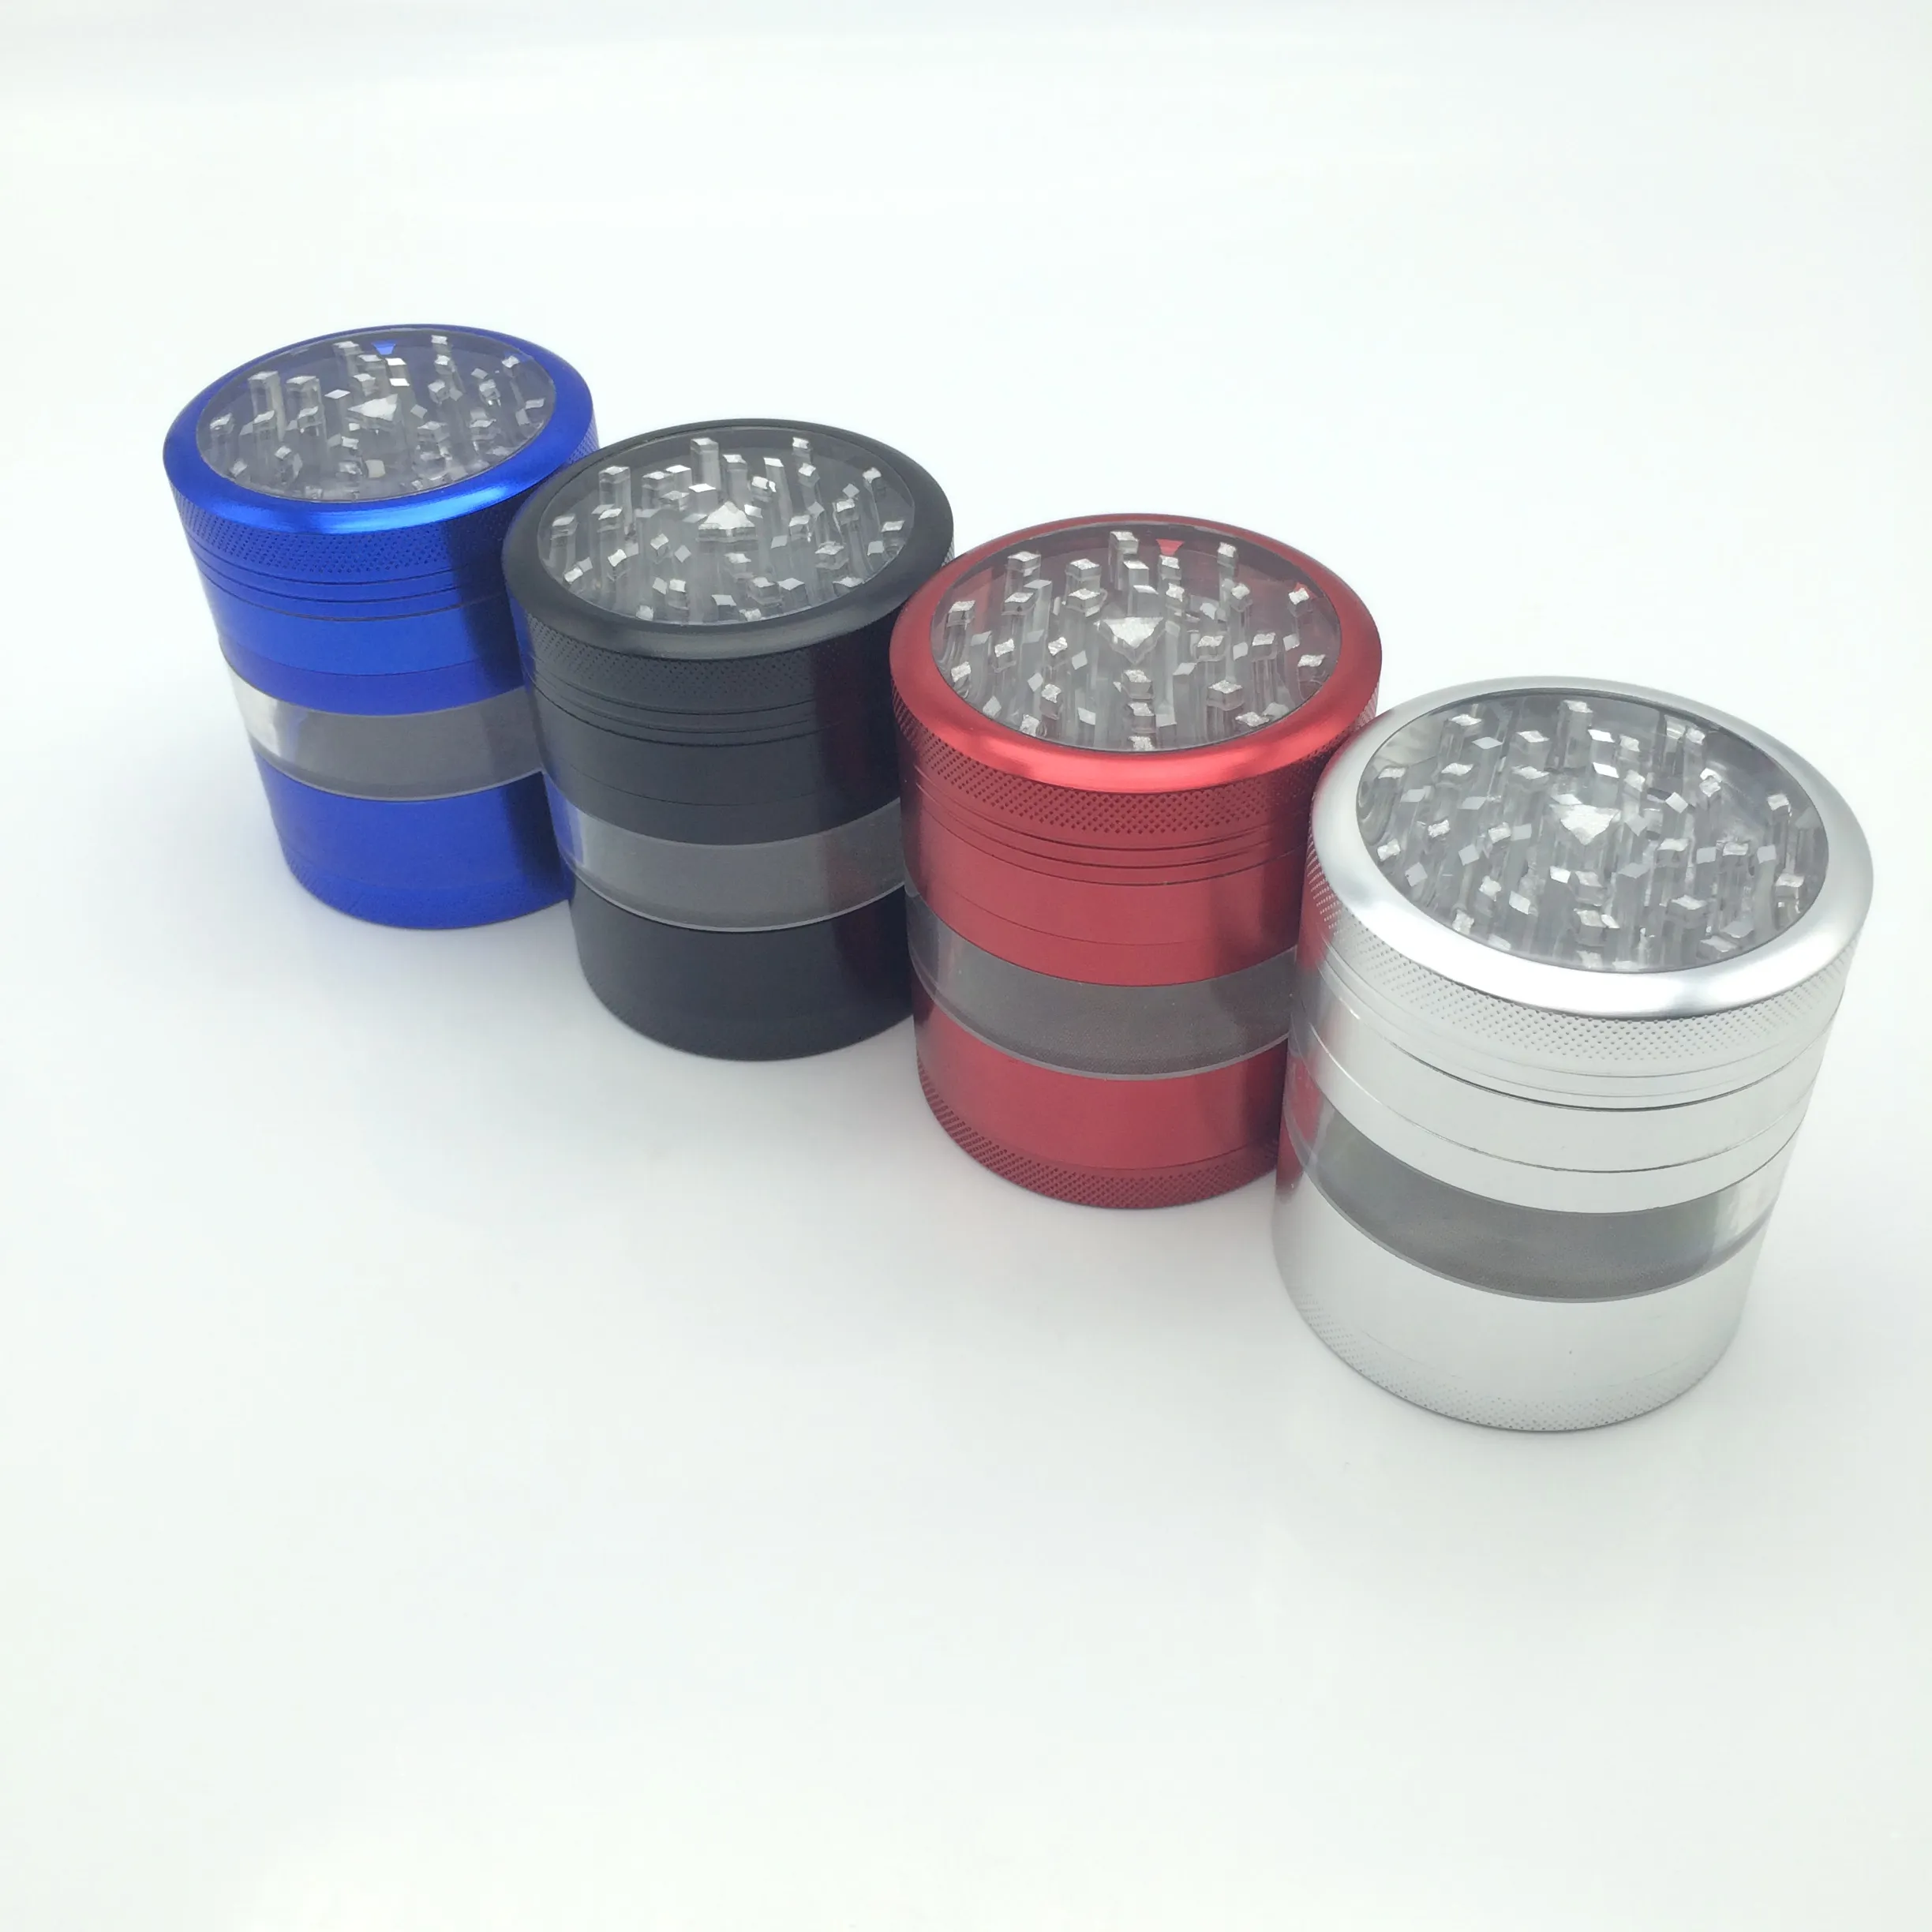 Double visibility window metal Herbal Herb Tobacco Grinder Spice Crusher Muller Hookah Shisha Chicha Accessory Grinder Tool.ES-GD-067